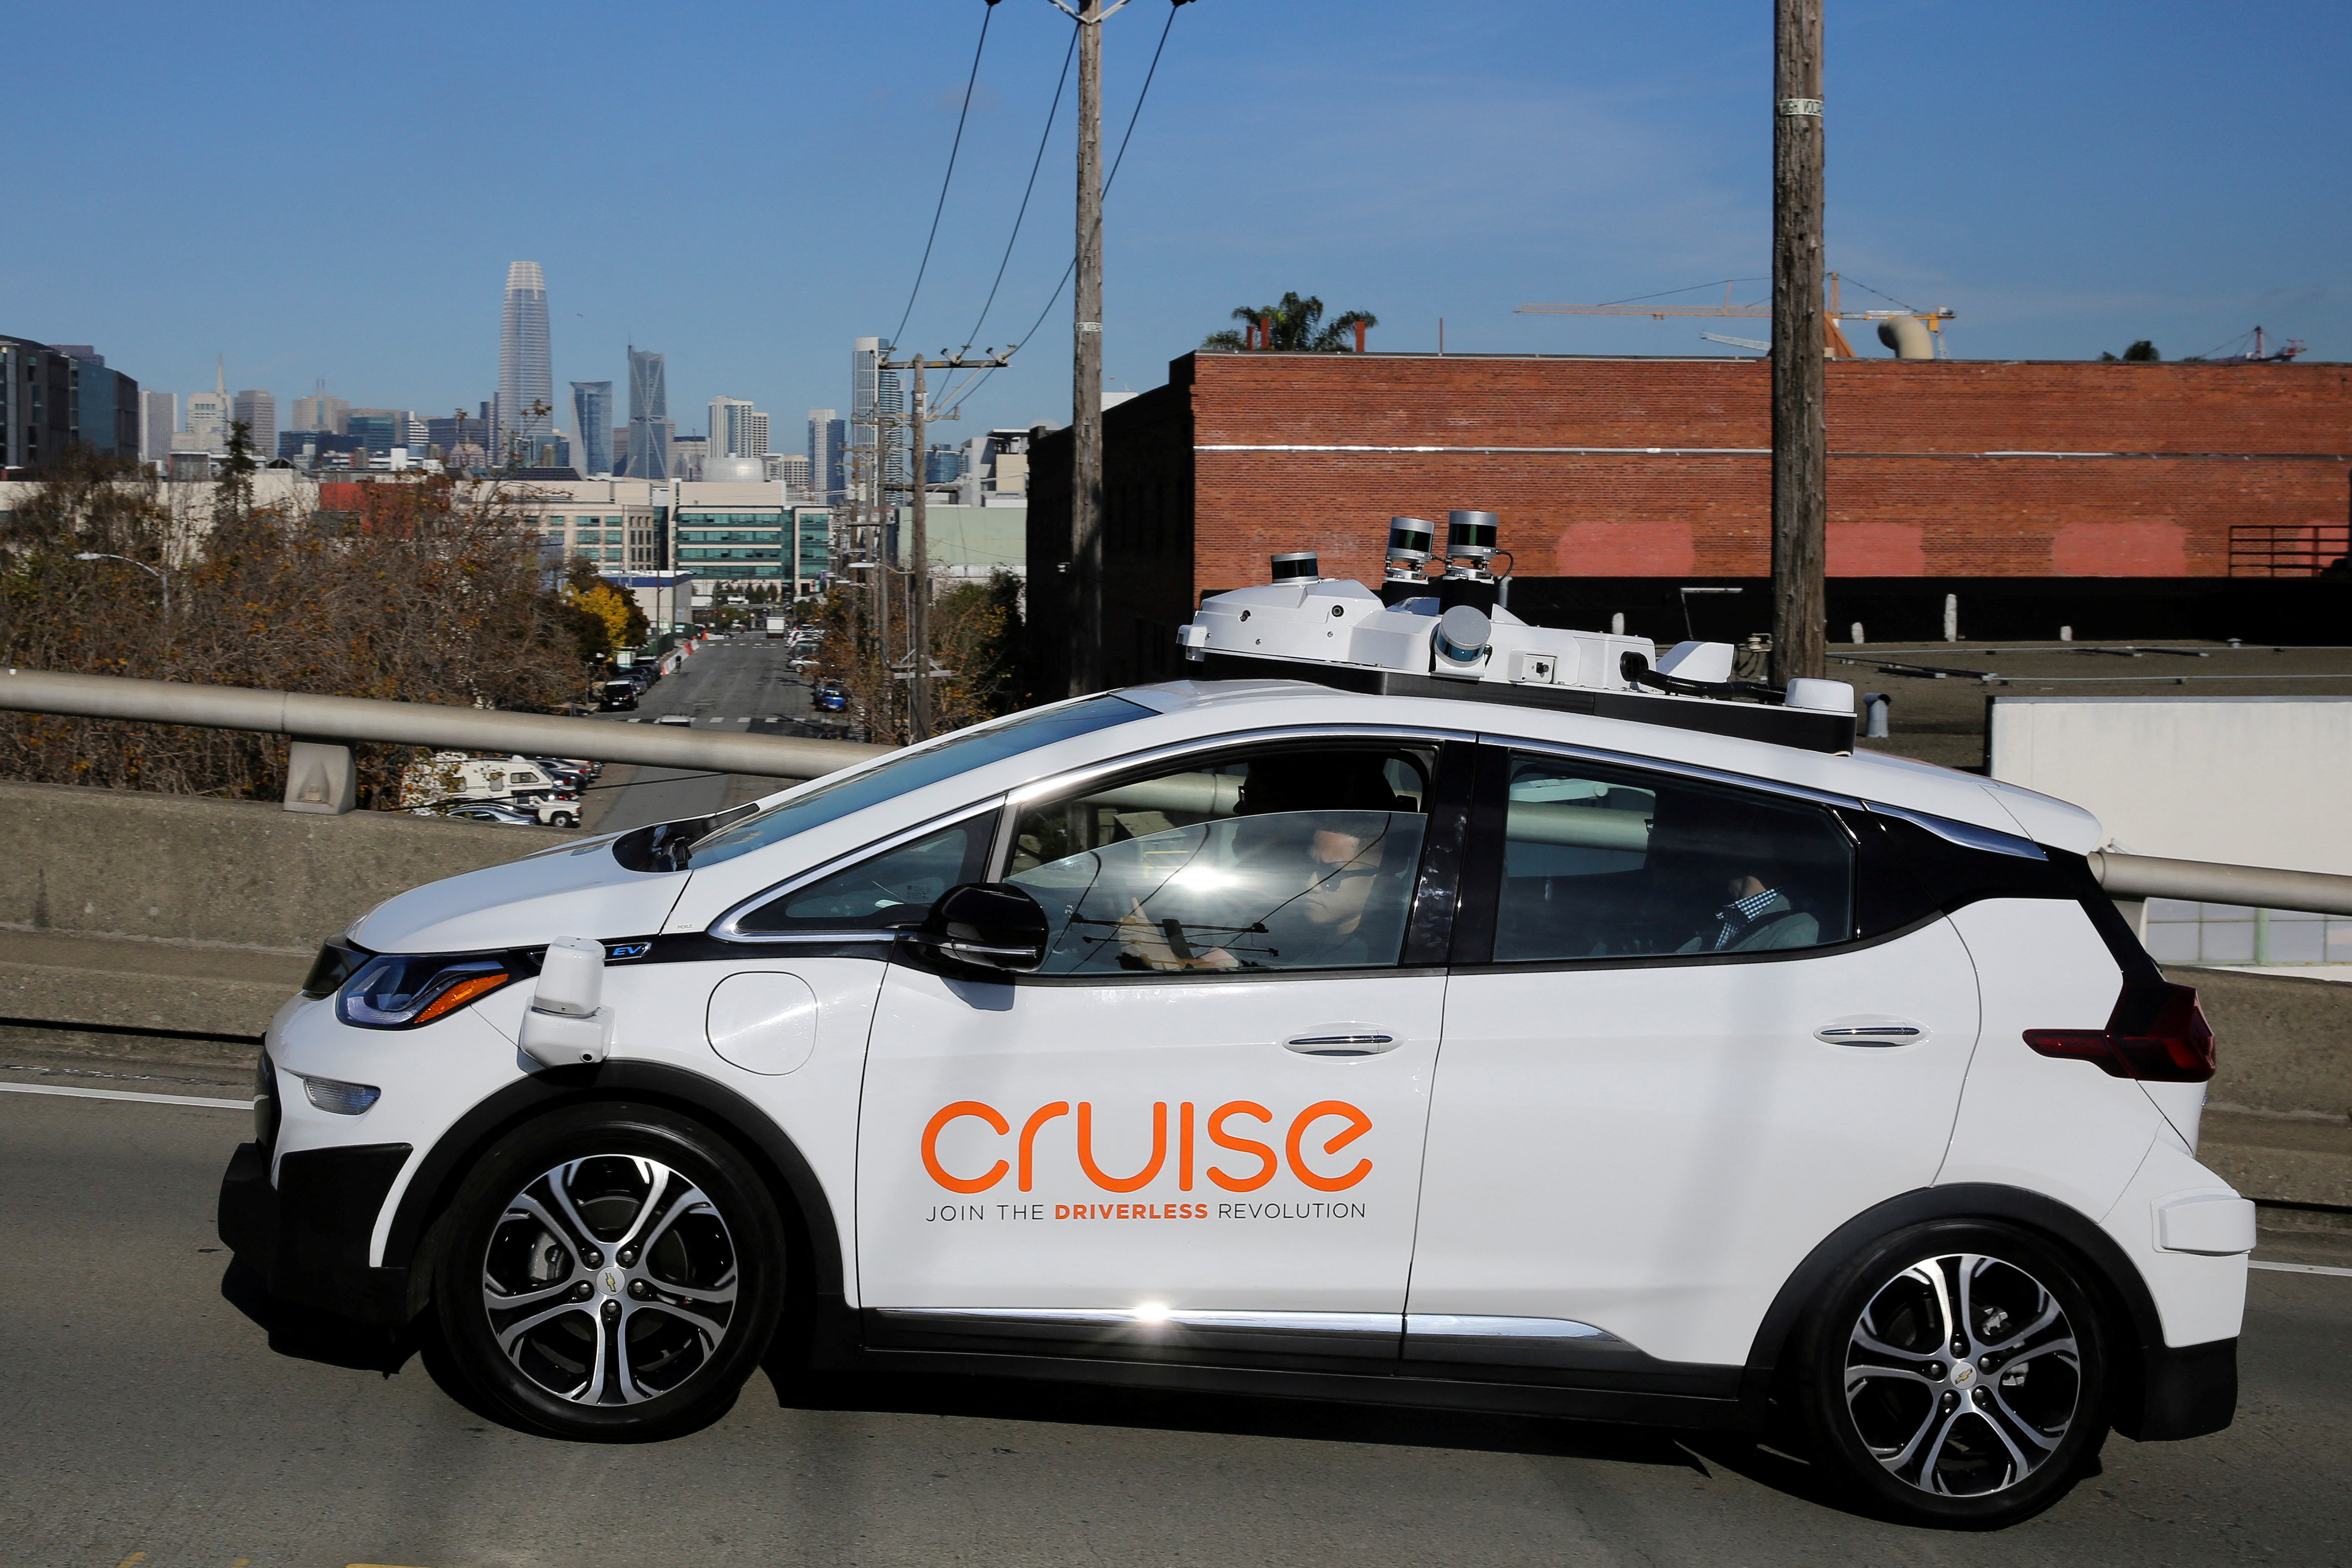 The San Francisco skyline is seen behind a self-driving GM Bolt EV during a media event where Cruise, GMÕs autonomous car unit, showed off its self-driving cars in San Francisco